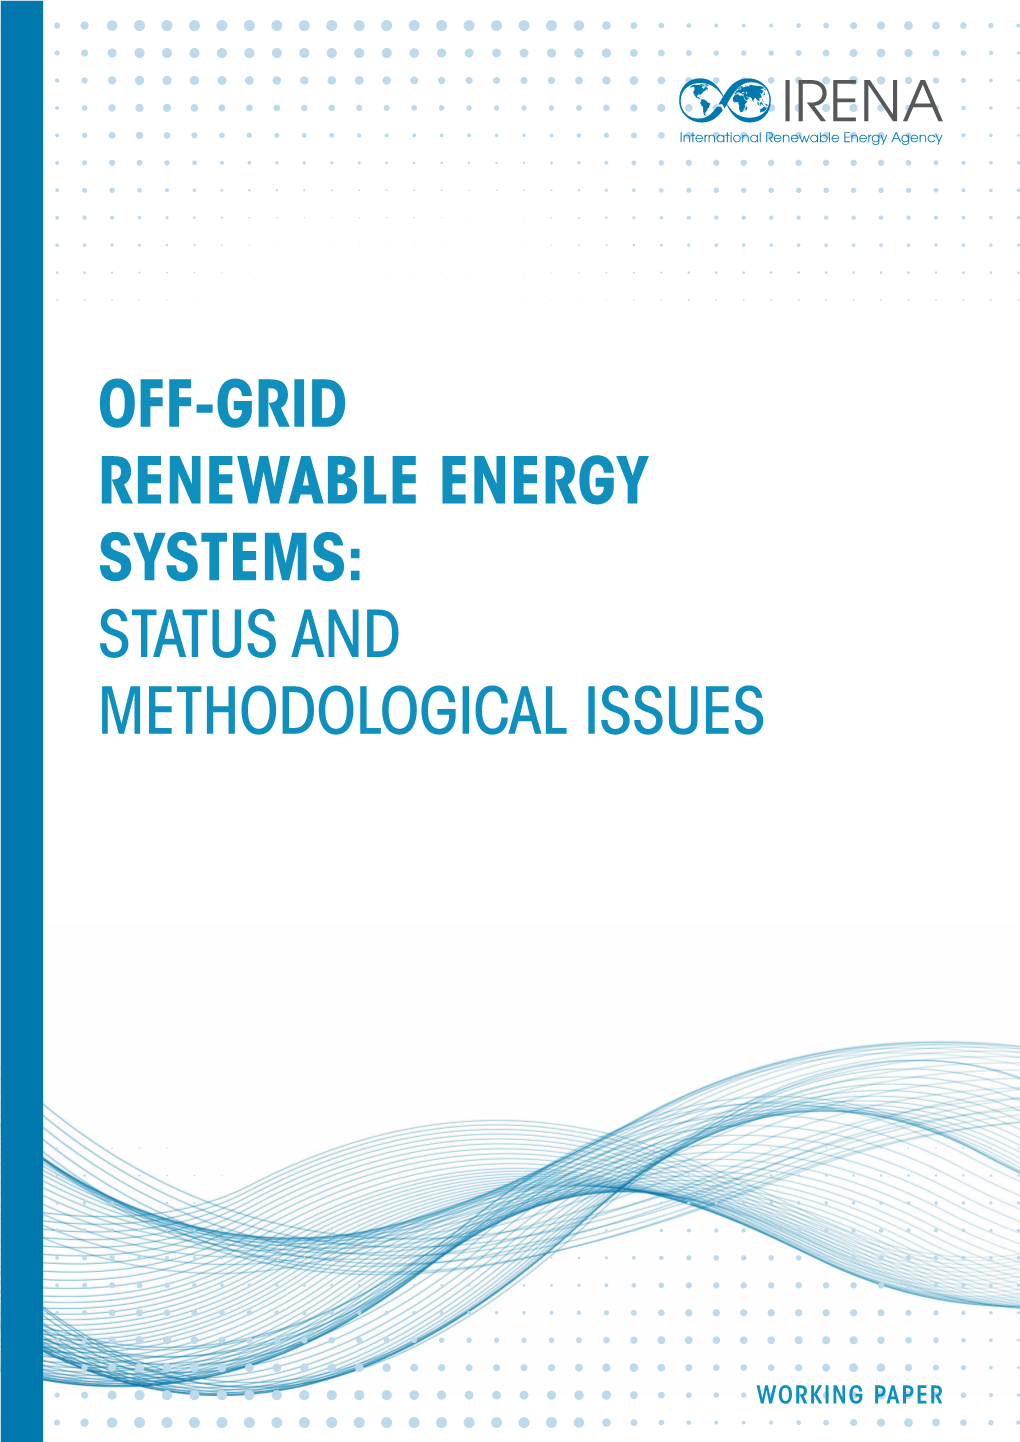 Off-Grid Renewable Energy Systems: Status and Methodological Issues